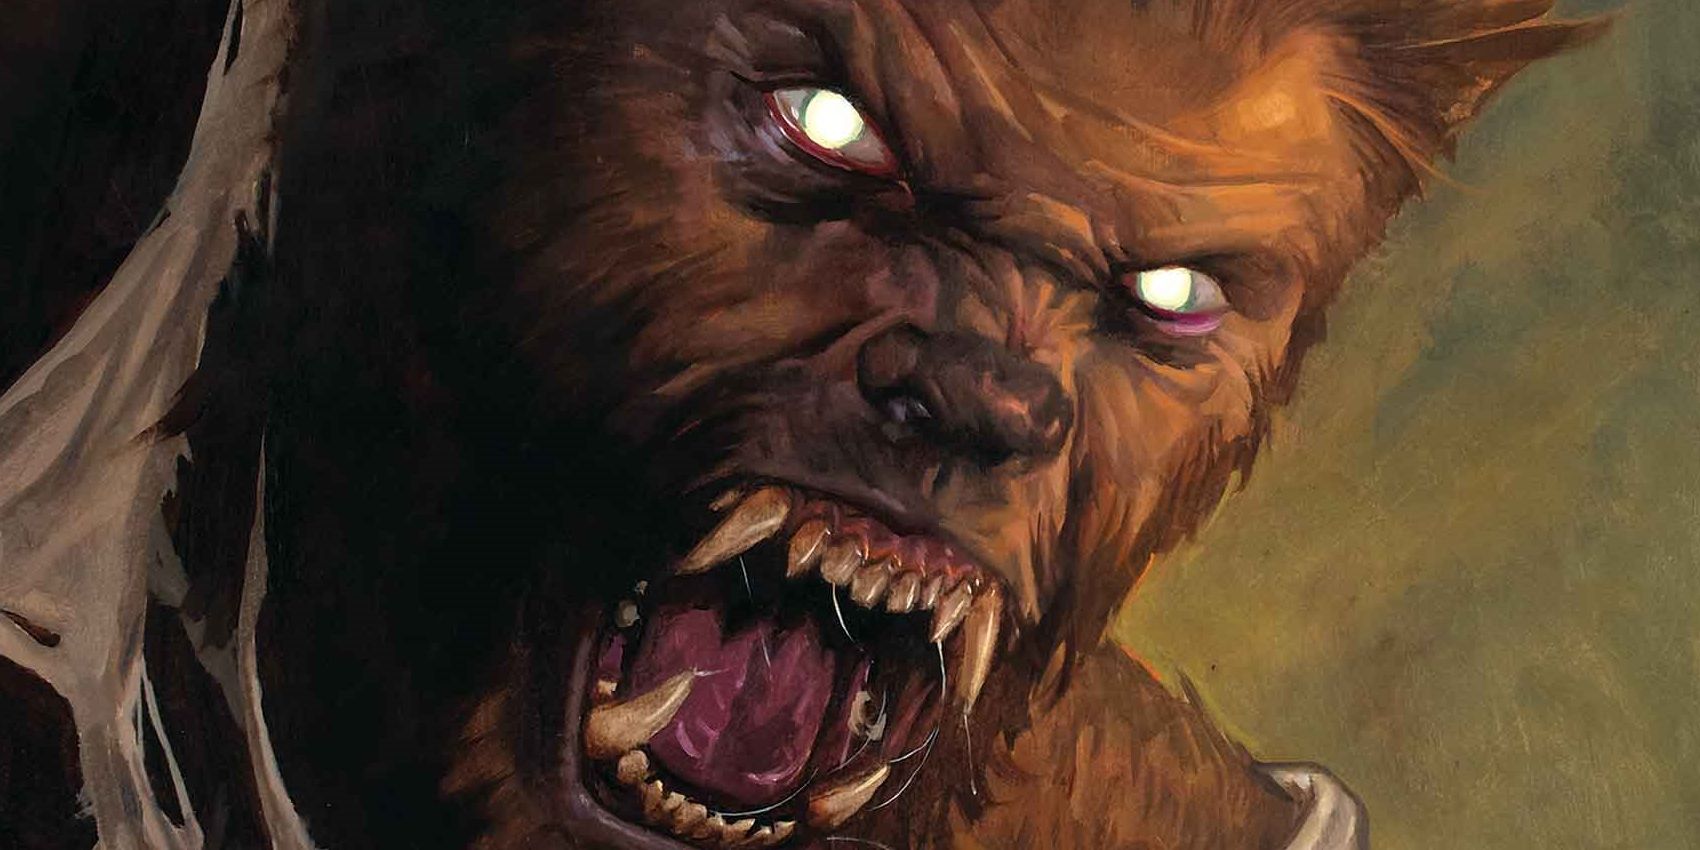 “A Very Steel Monster Comedian”: The MCU’s Werewolf Through Evening Unleashes Bloody Fury in New Pink Band Collection